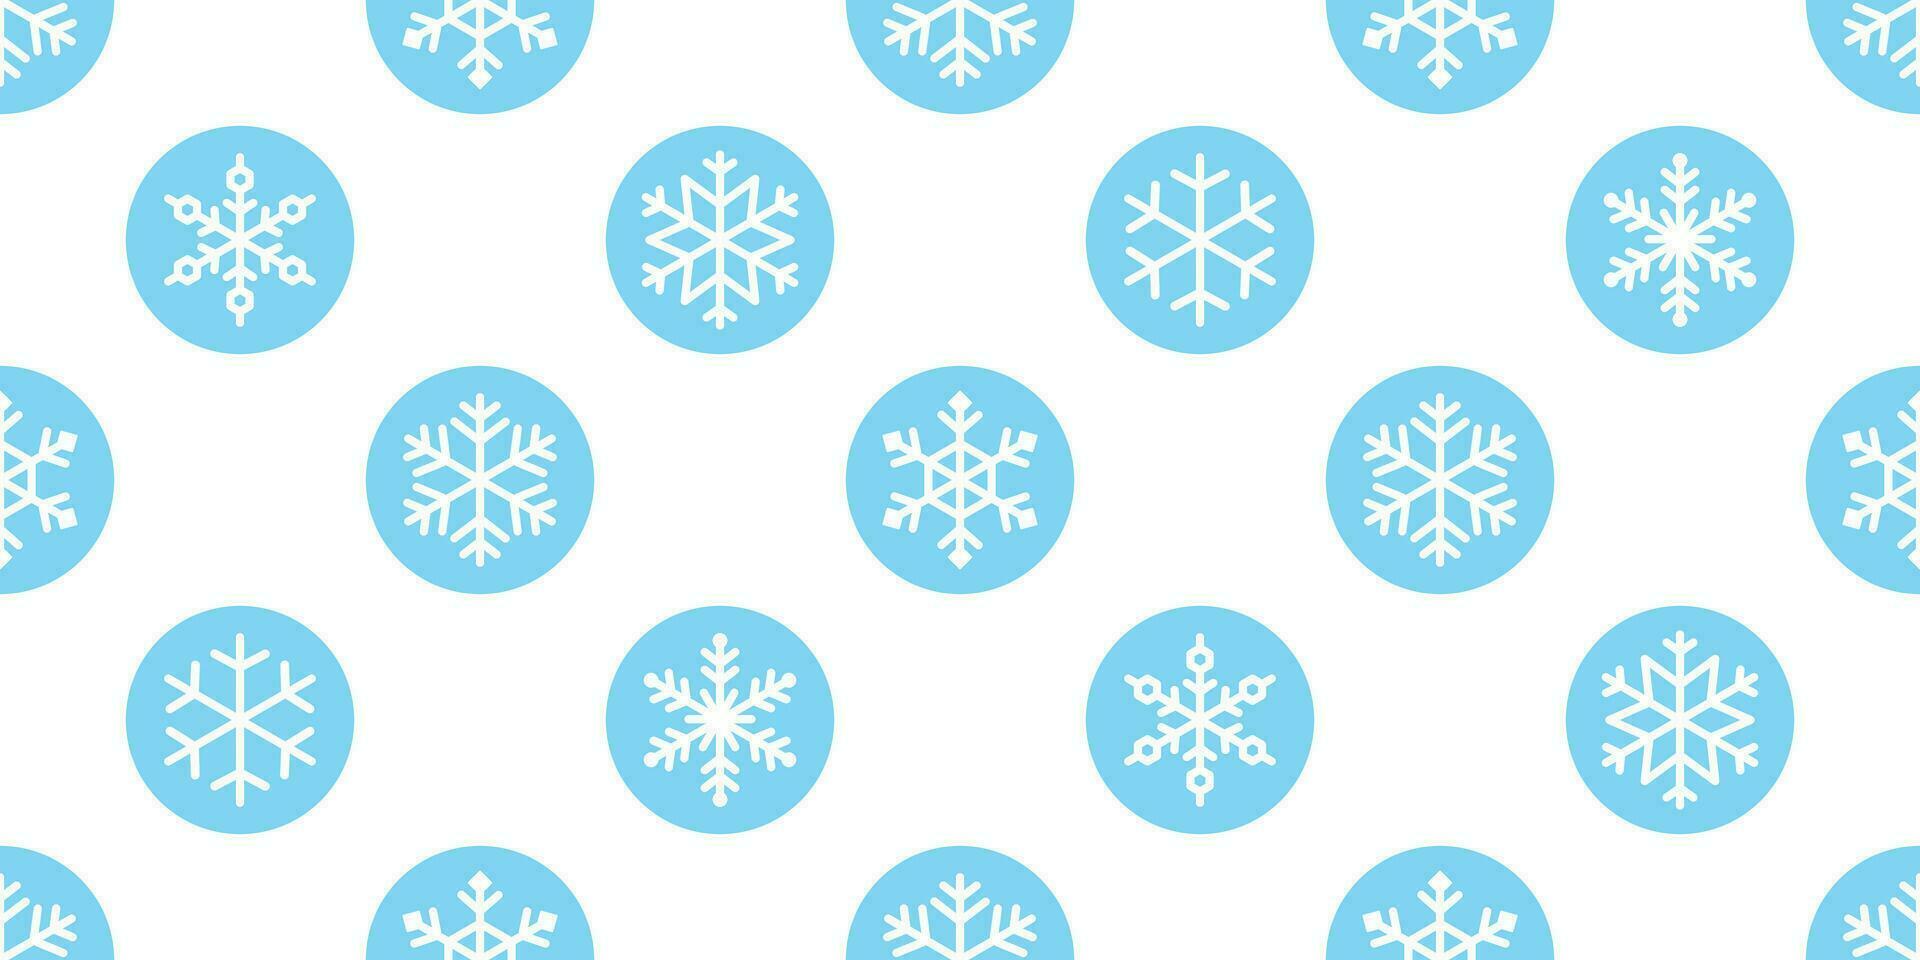 Snowflake seamless pattern vector Christmas snow Xmas Santa Claus scarf isolated polka dot repeat wallpaper tile background illustration gift wrapping paper design